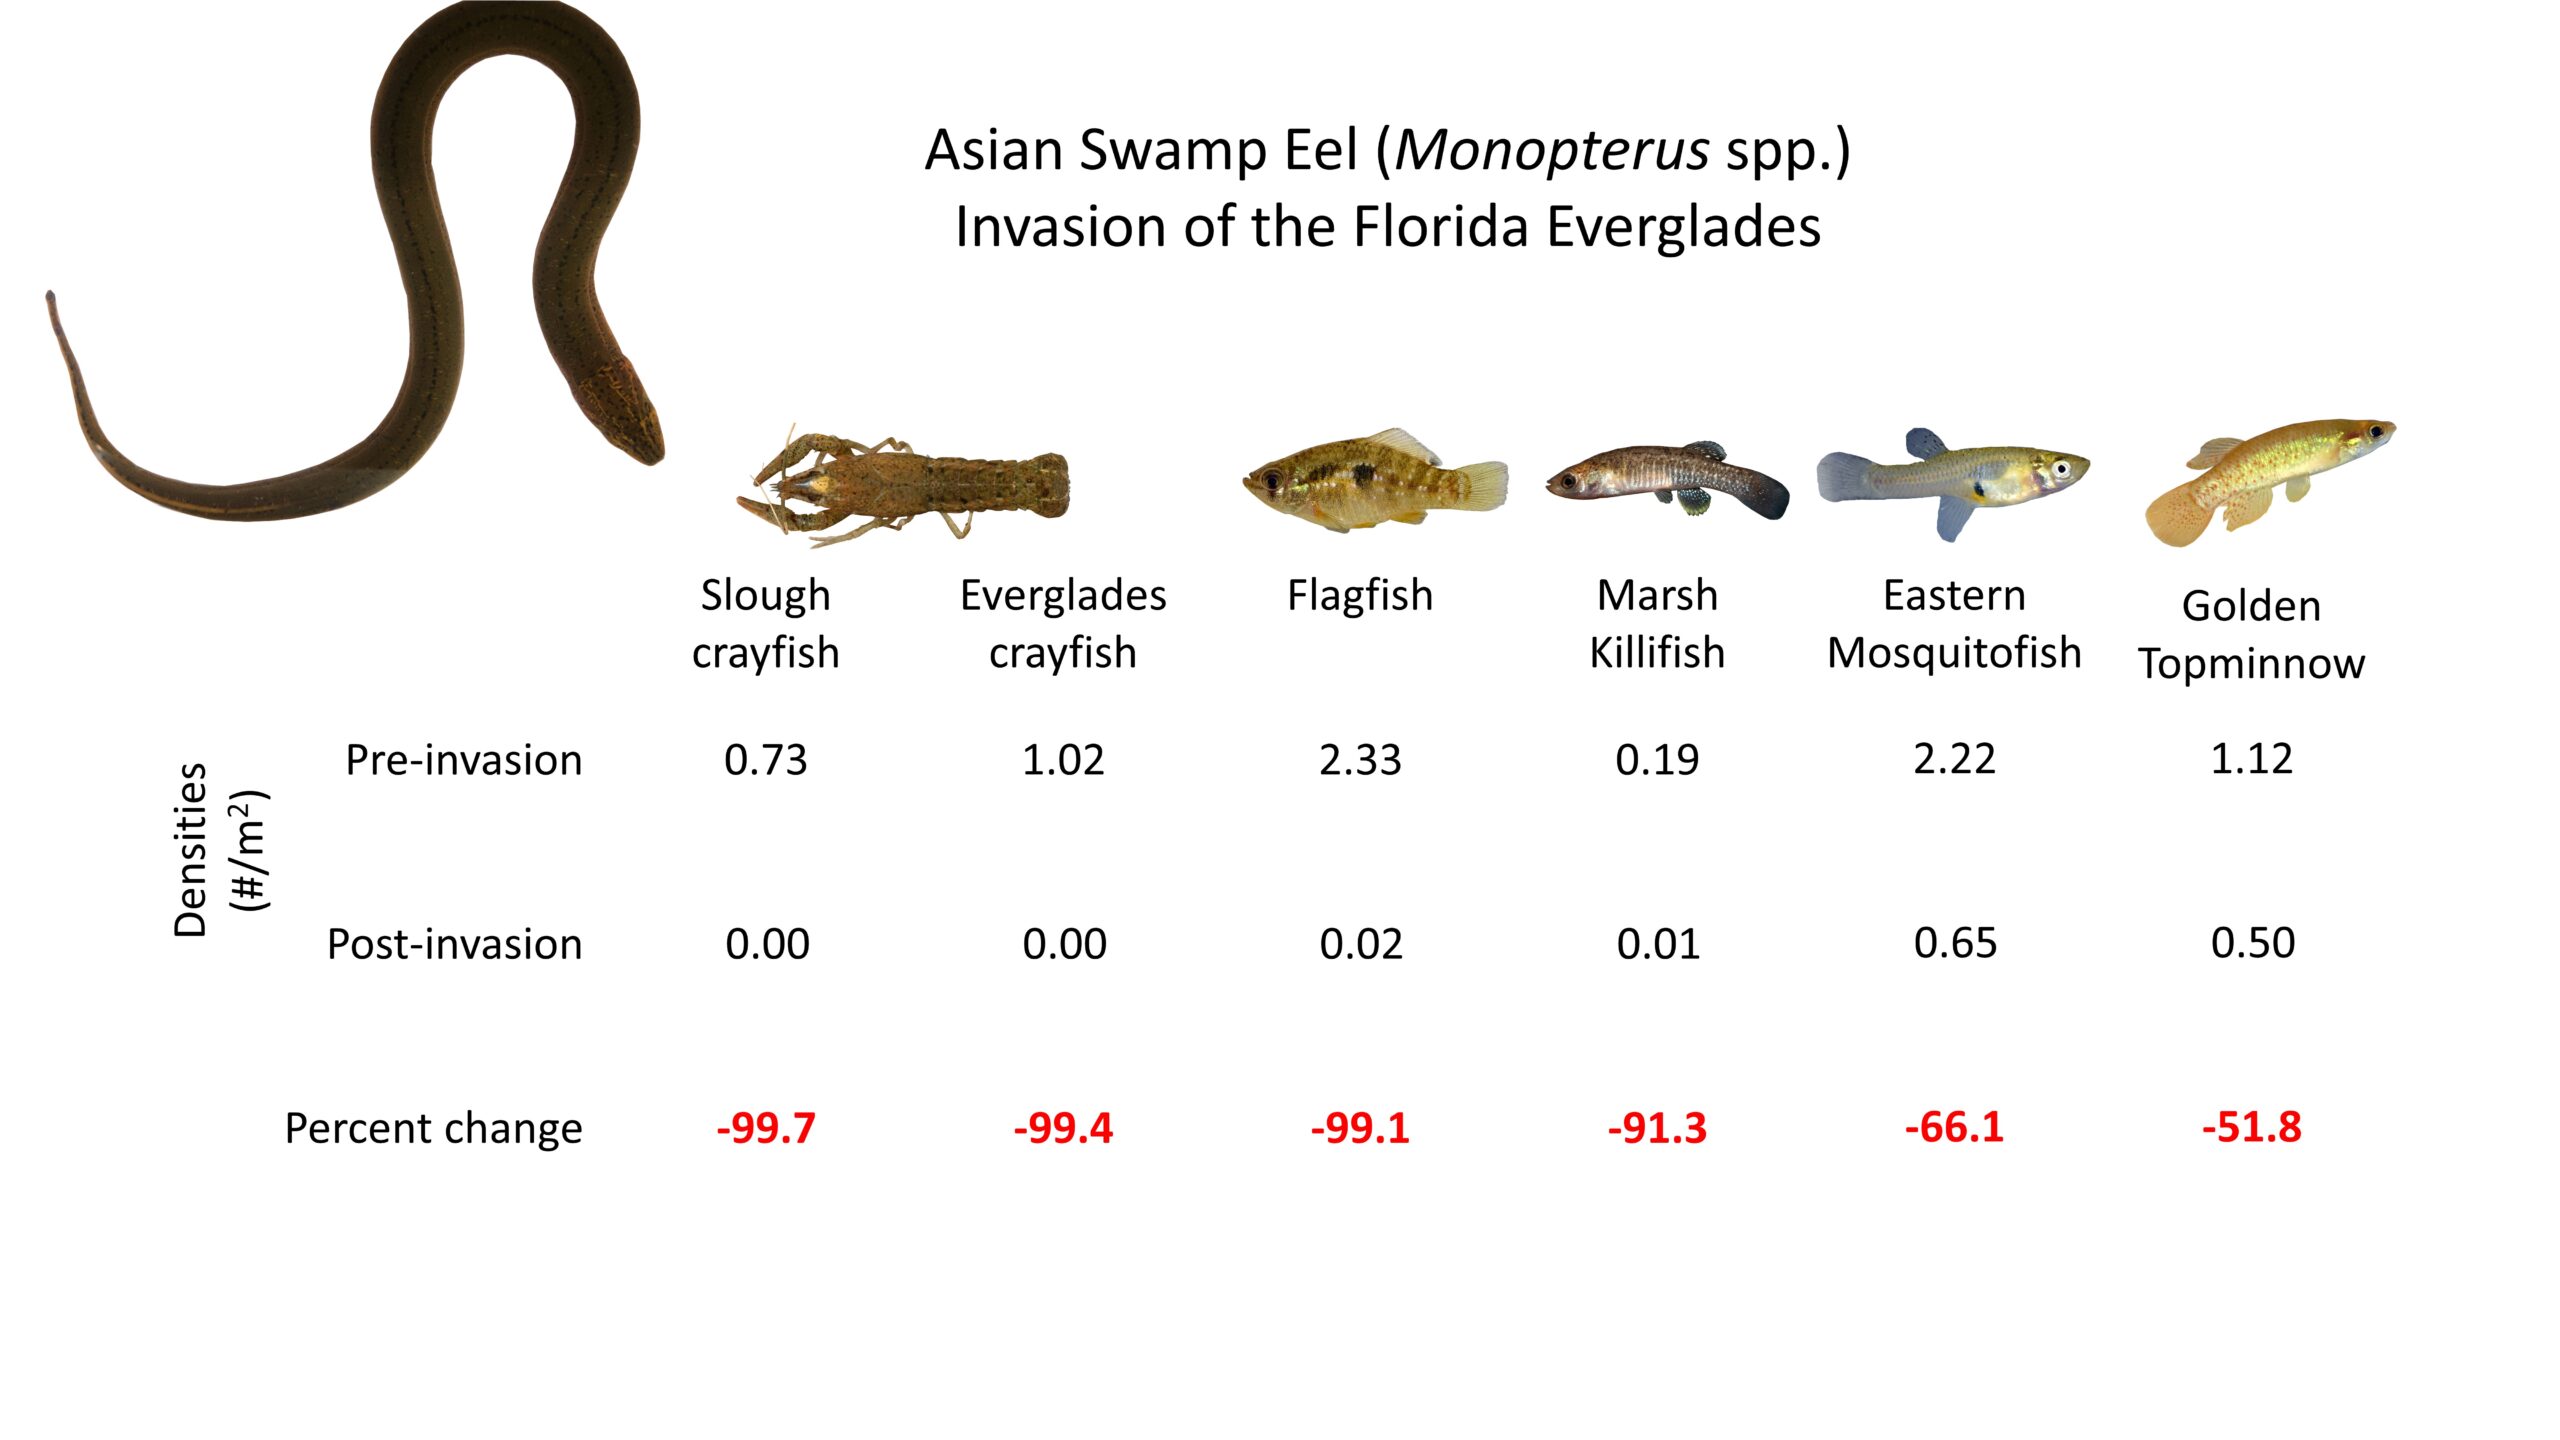 Images of prey species and their pre-invasion and post-invasion densities in the Everglades, along with their percent changes following swamp eel invasion.